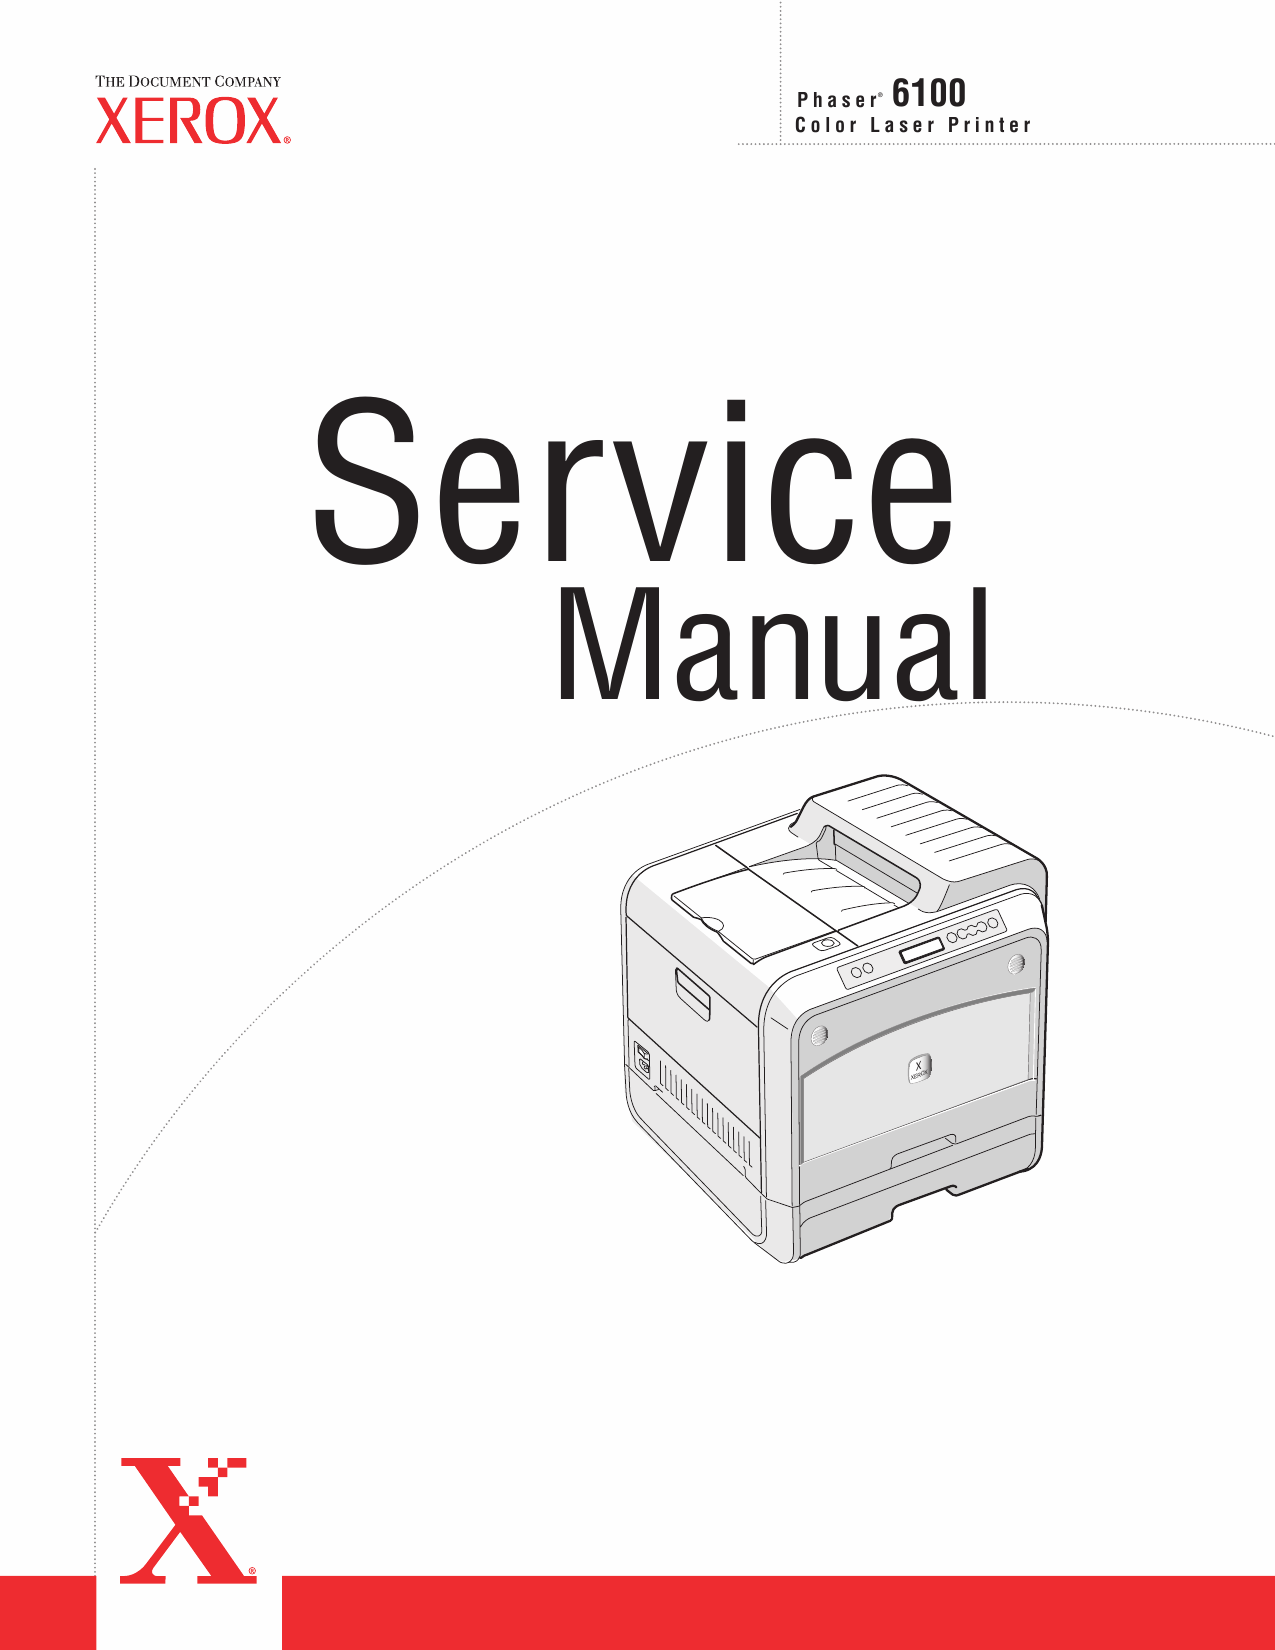 Xerox Phaser 6100 Parts List and Service Manual-1